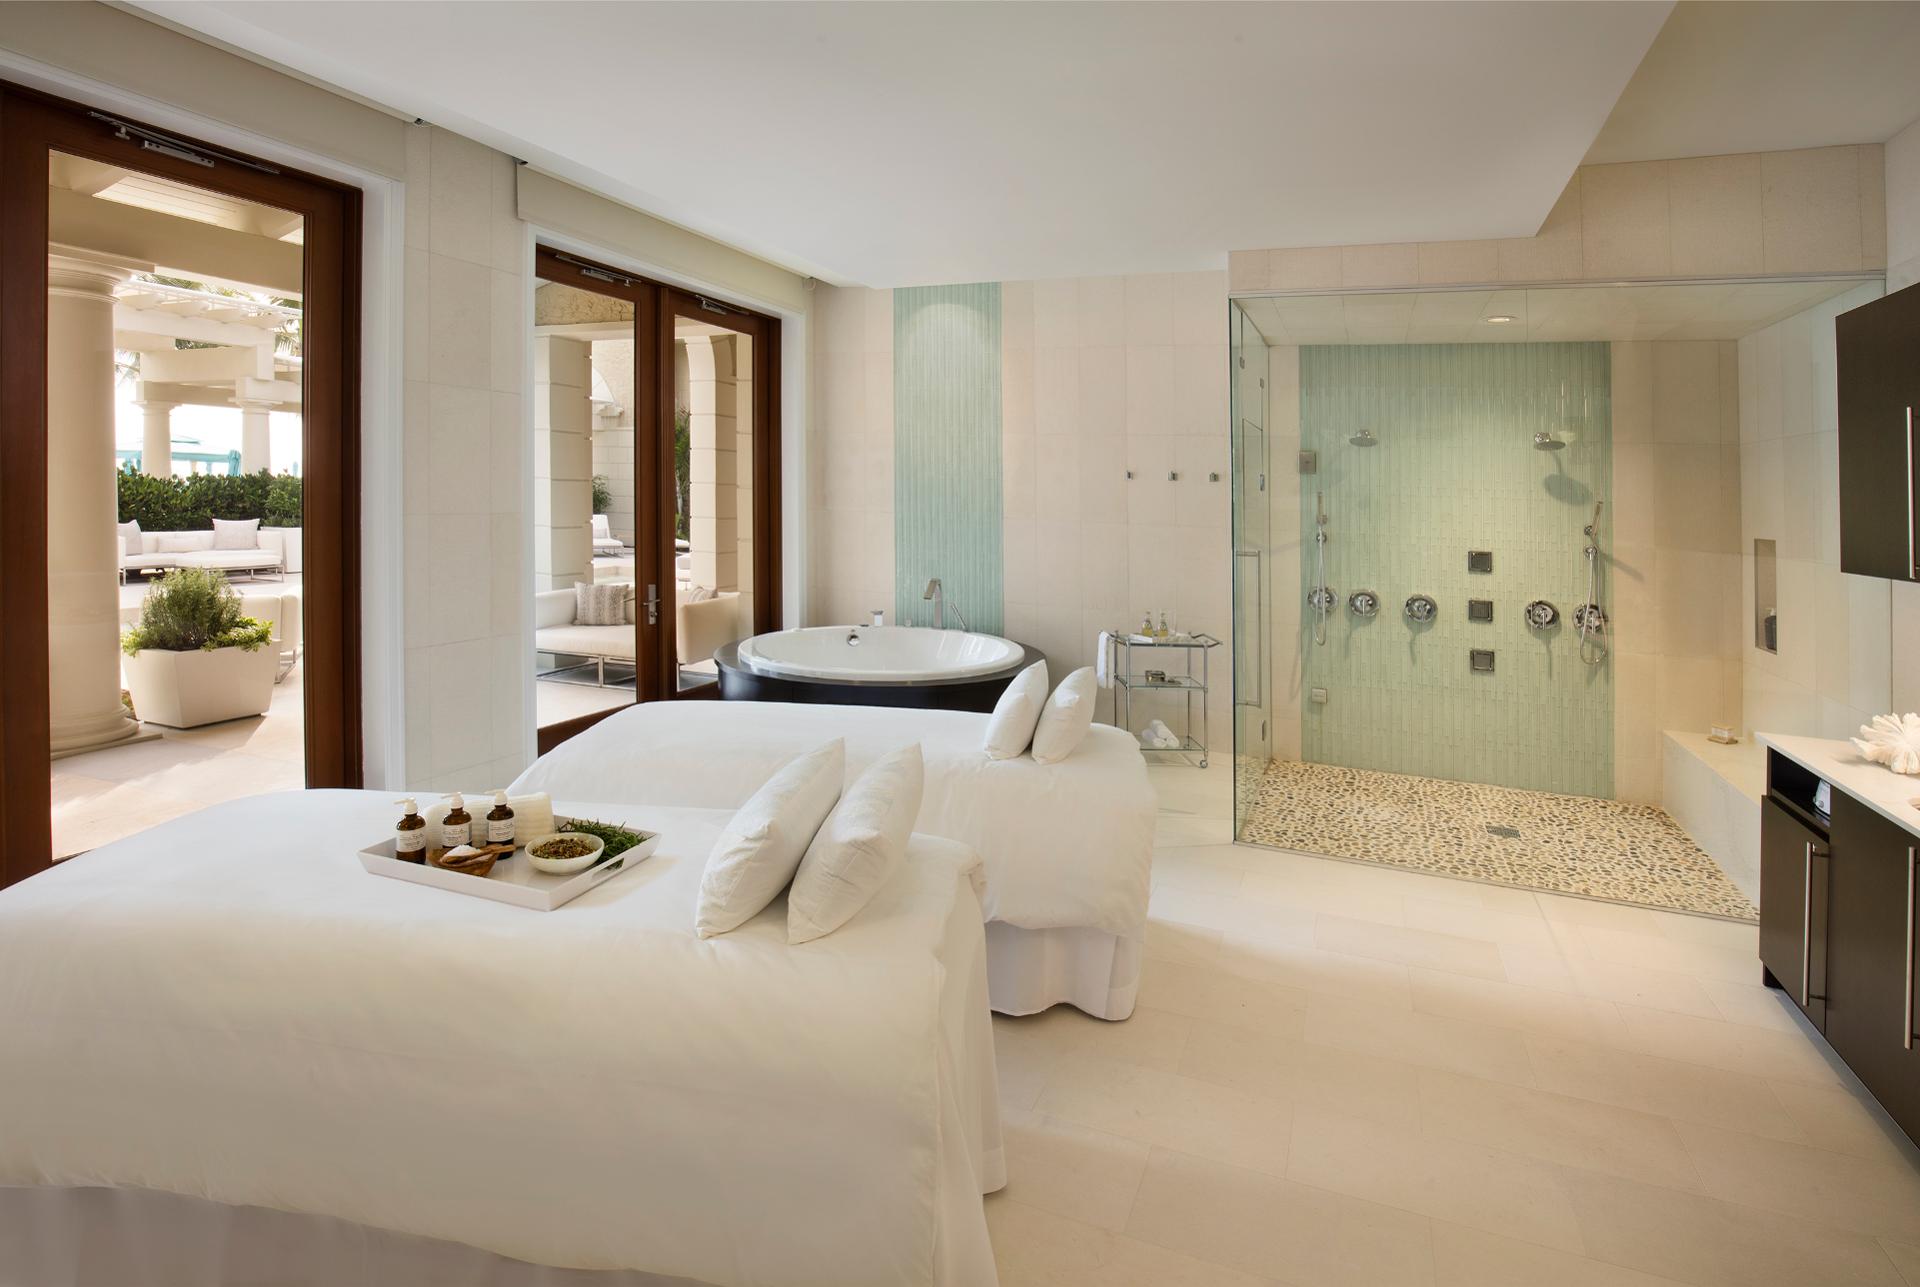 The Spa at The Breakers Palm Beach offers a slew of exfoliating and cleansing treatments, from marine algae body wraps to a rose quartz massage.